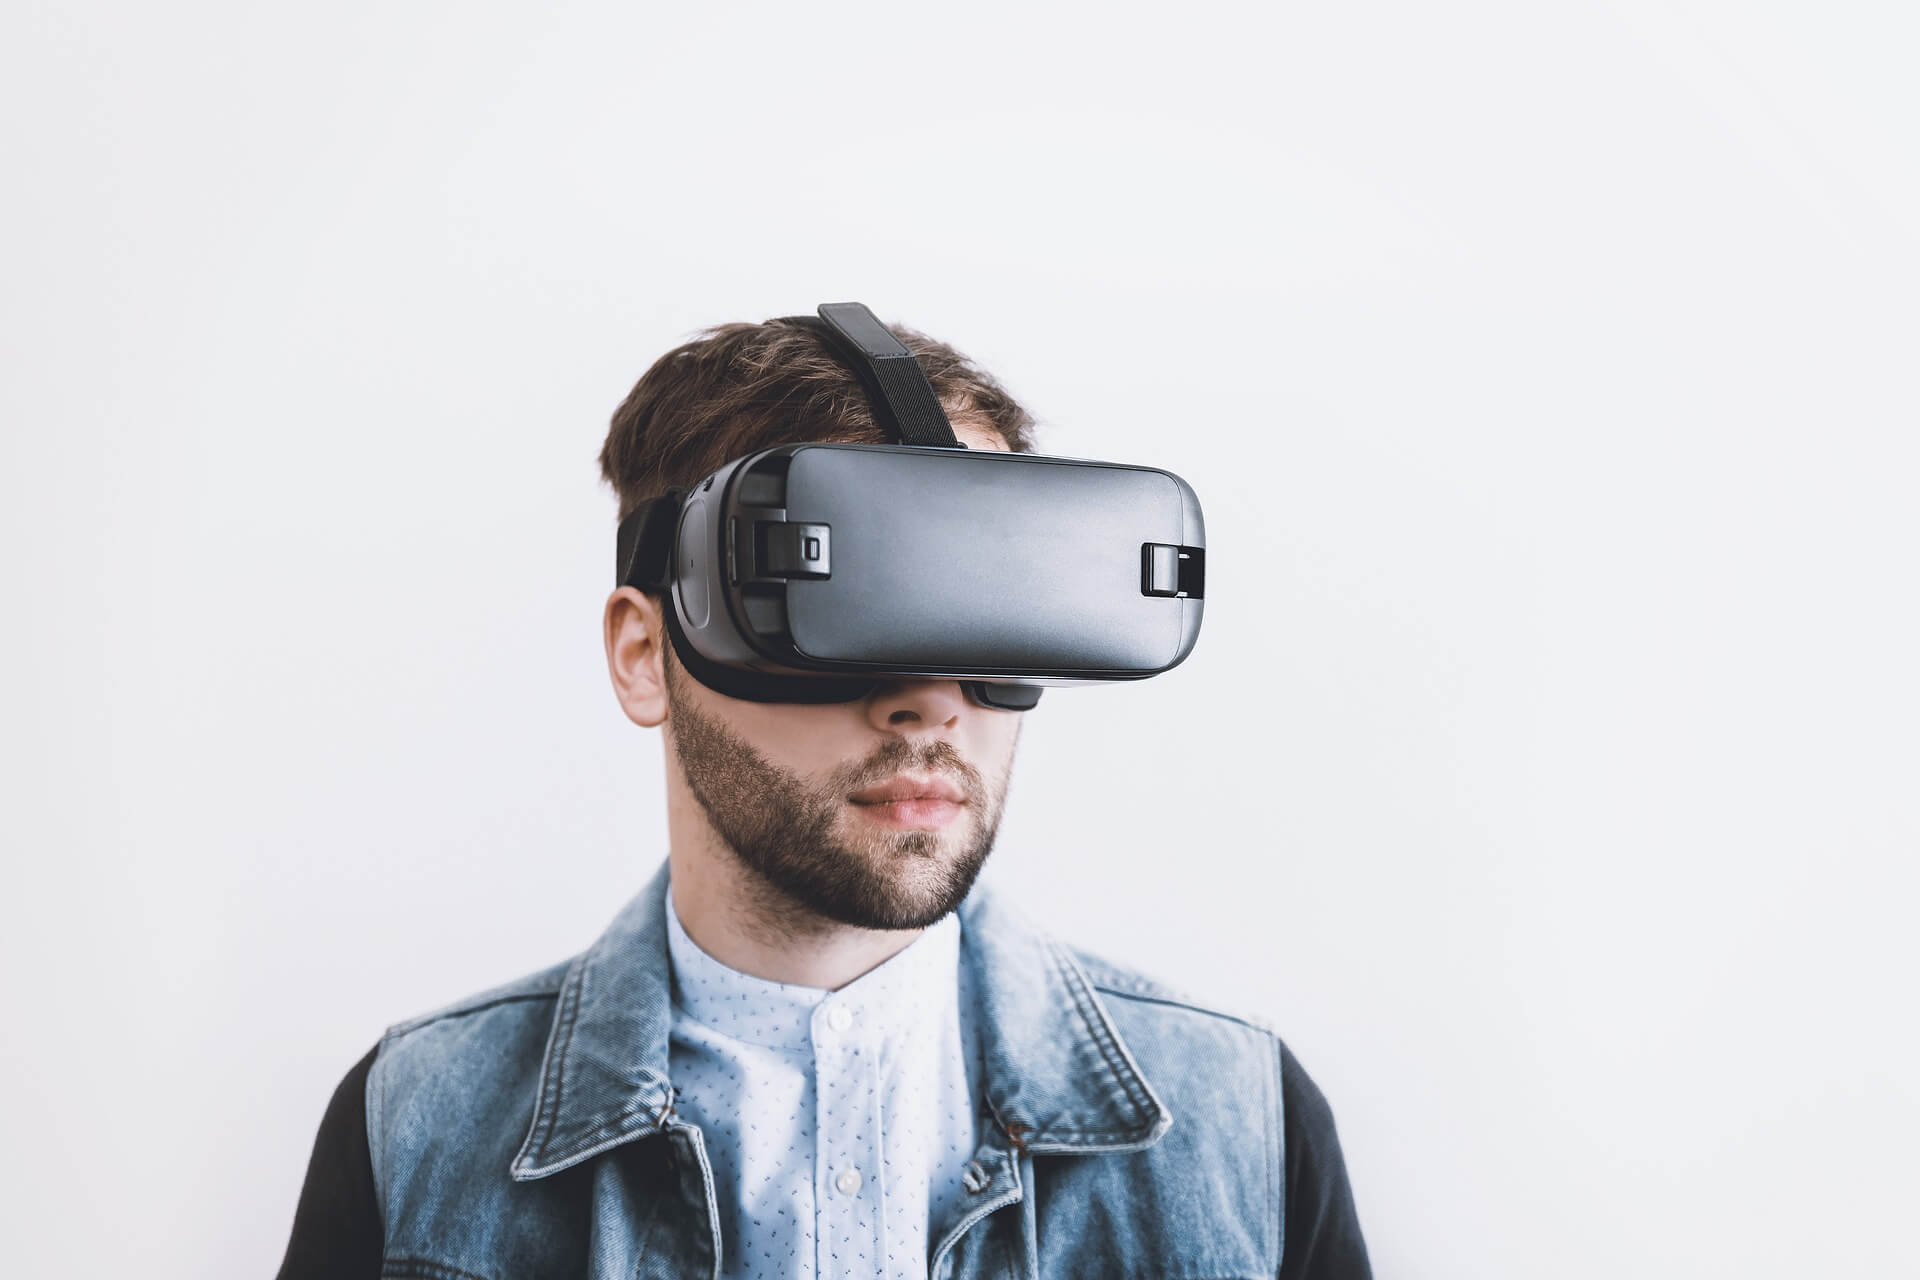 Virtual reality helps provisioning psychological therapy